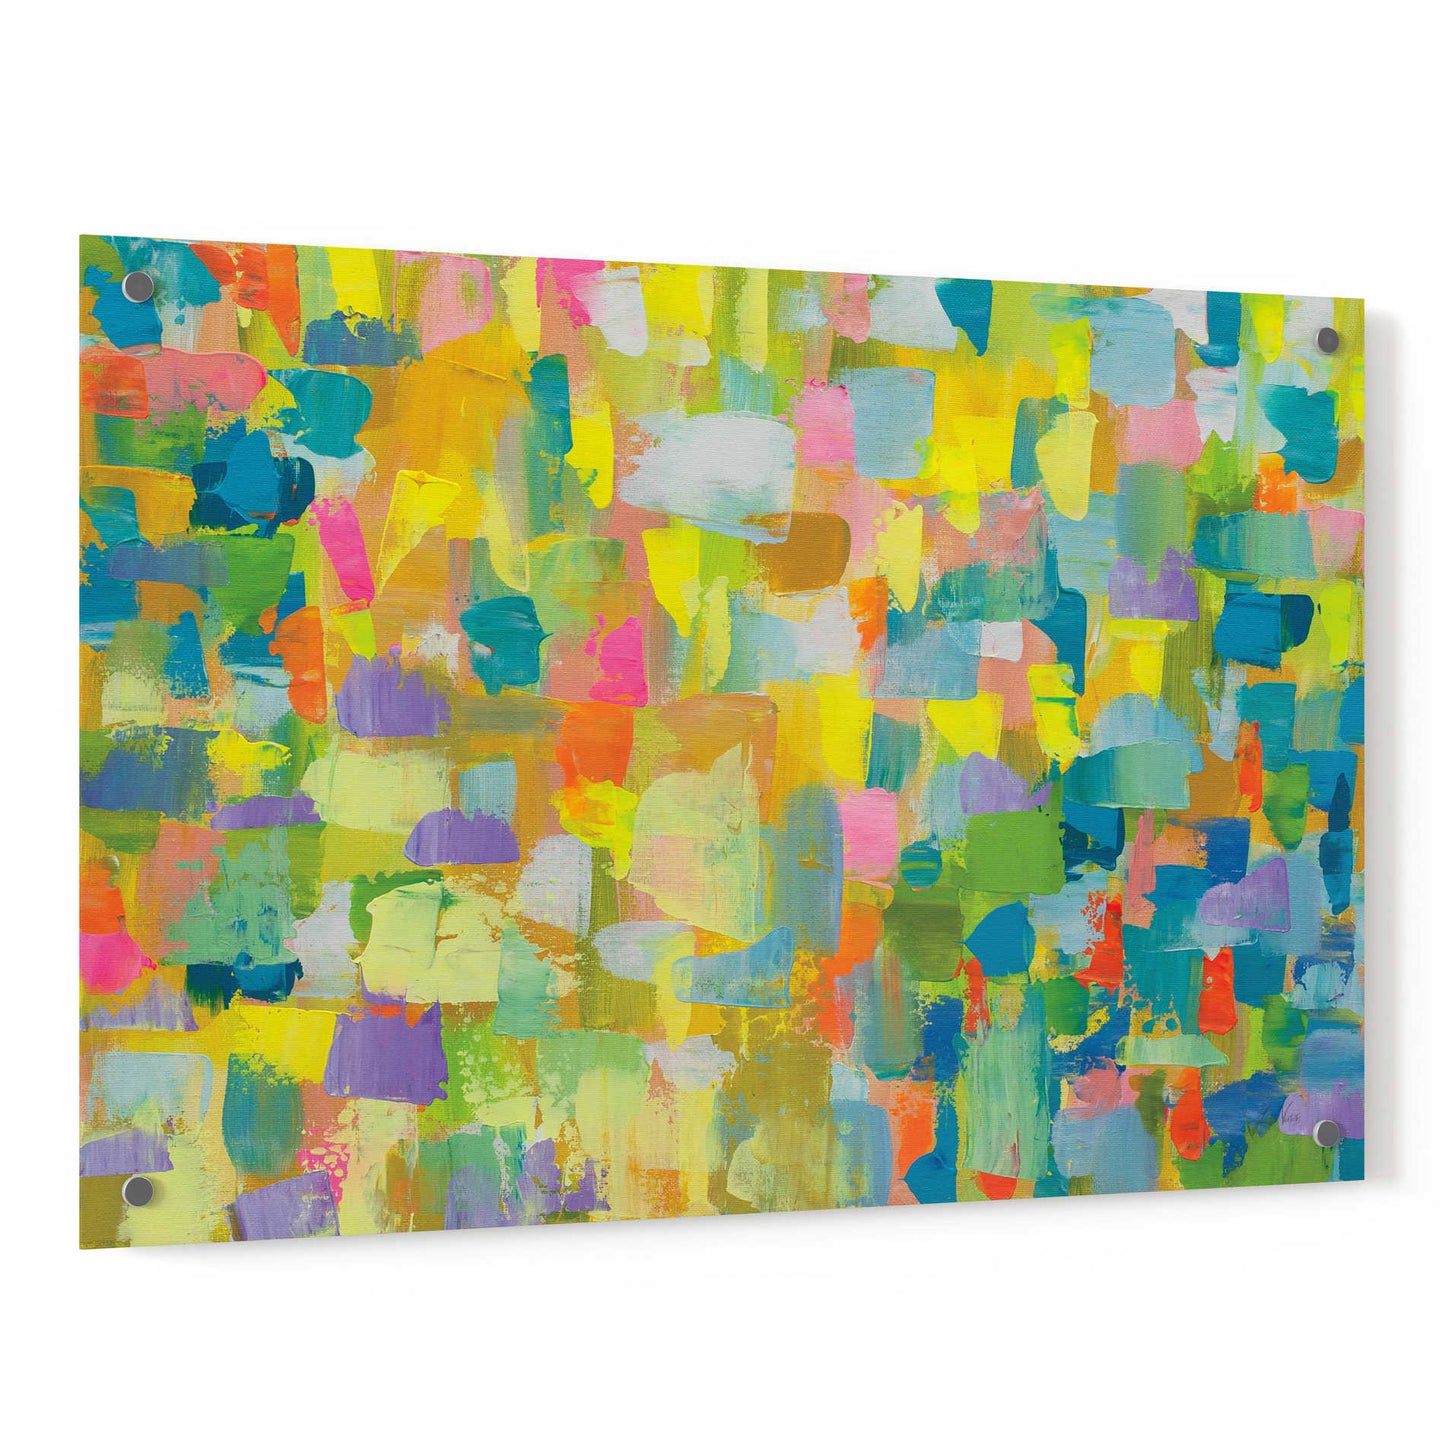 Epic Art 'Merrymaking' by Jeanette Vertentes, Acrylic Glass Wall Art,36x24